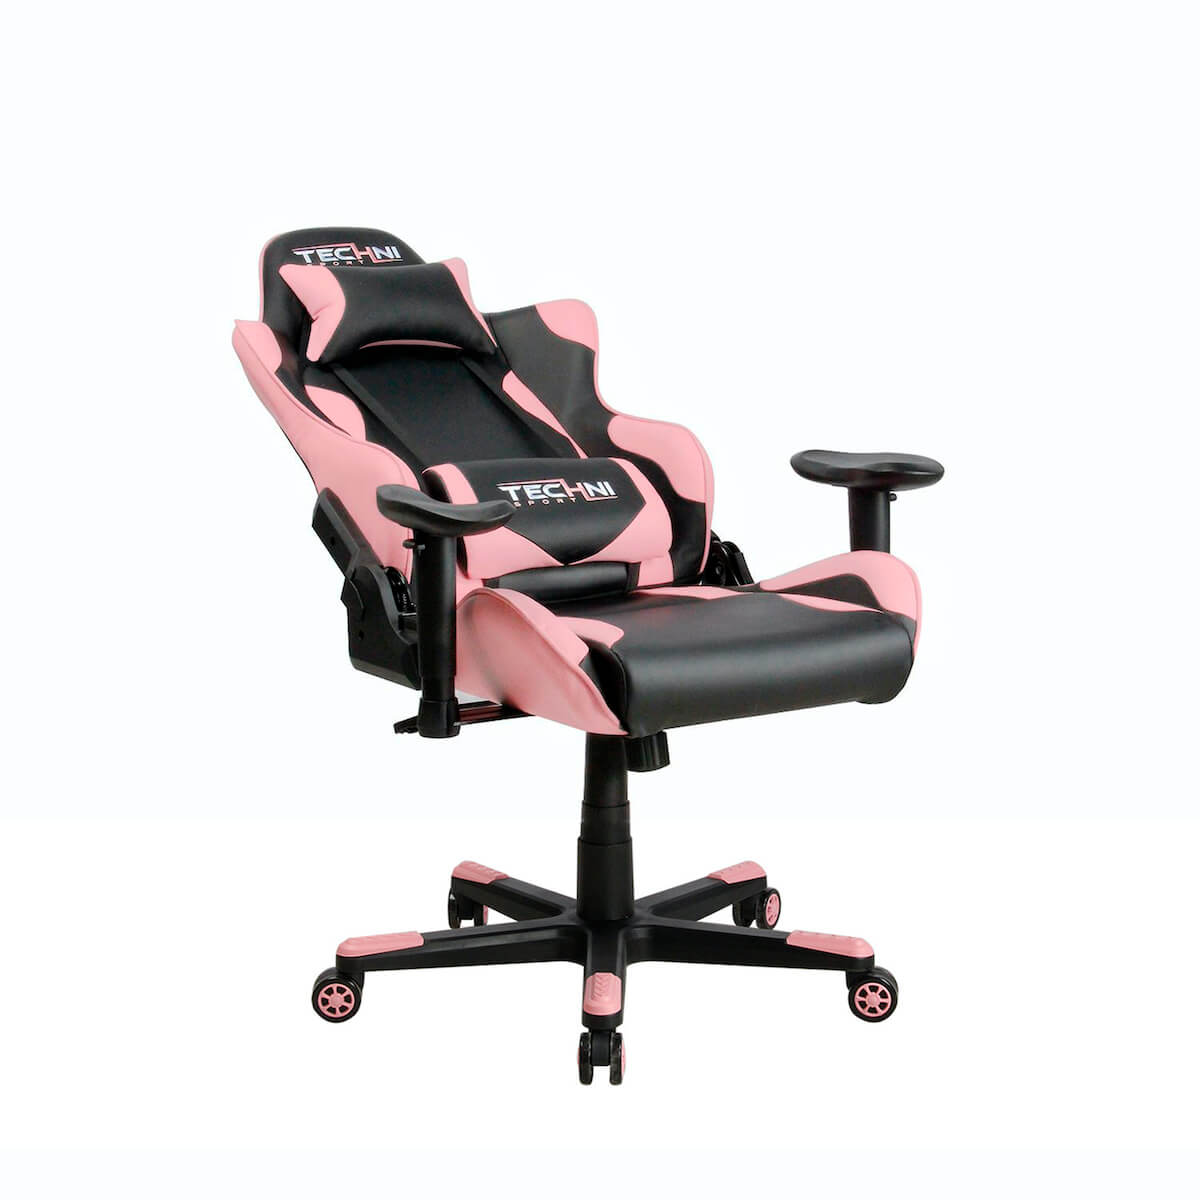 Techni Sport TS-4300 Pink Ergonomic High Back Racer Style PC Gaming Chair RTA-TS43-PNK Reclined